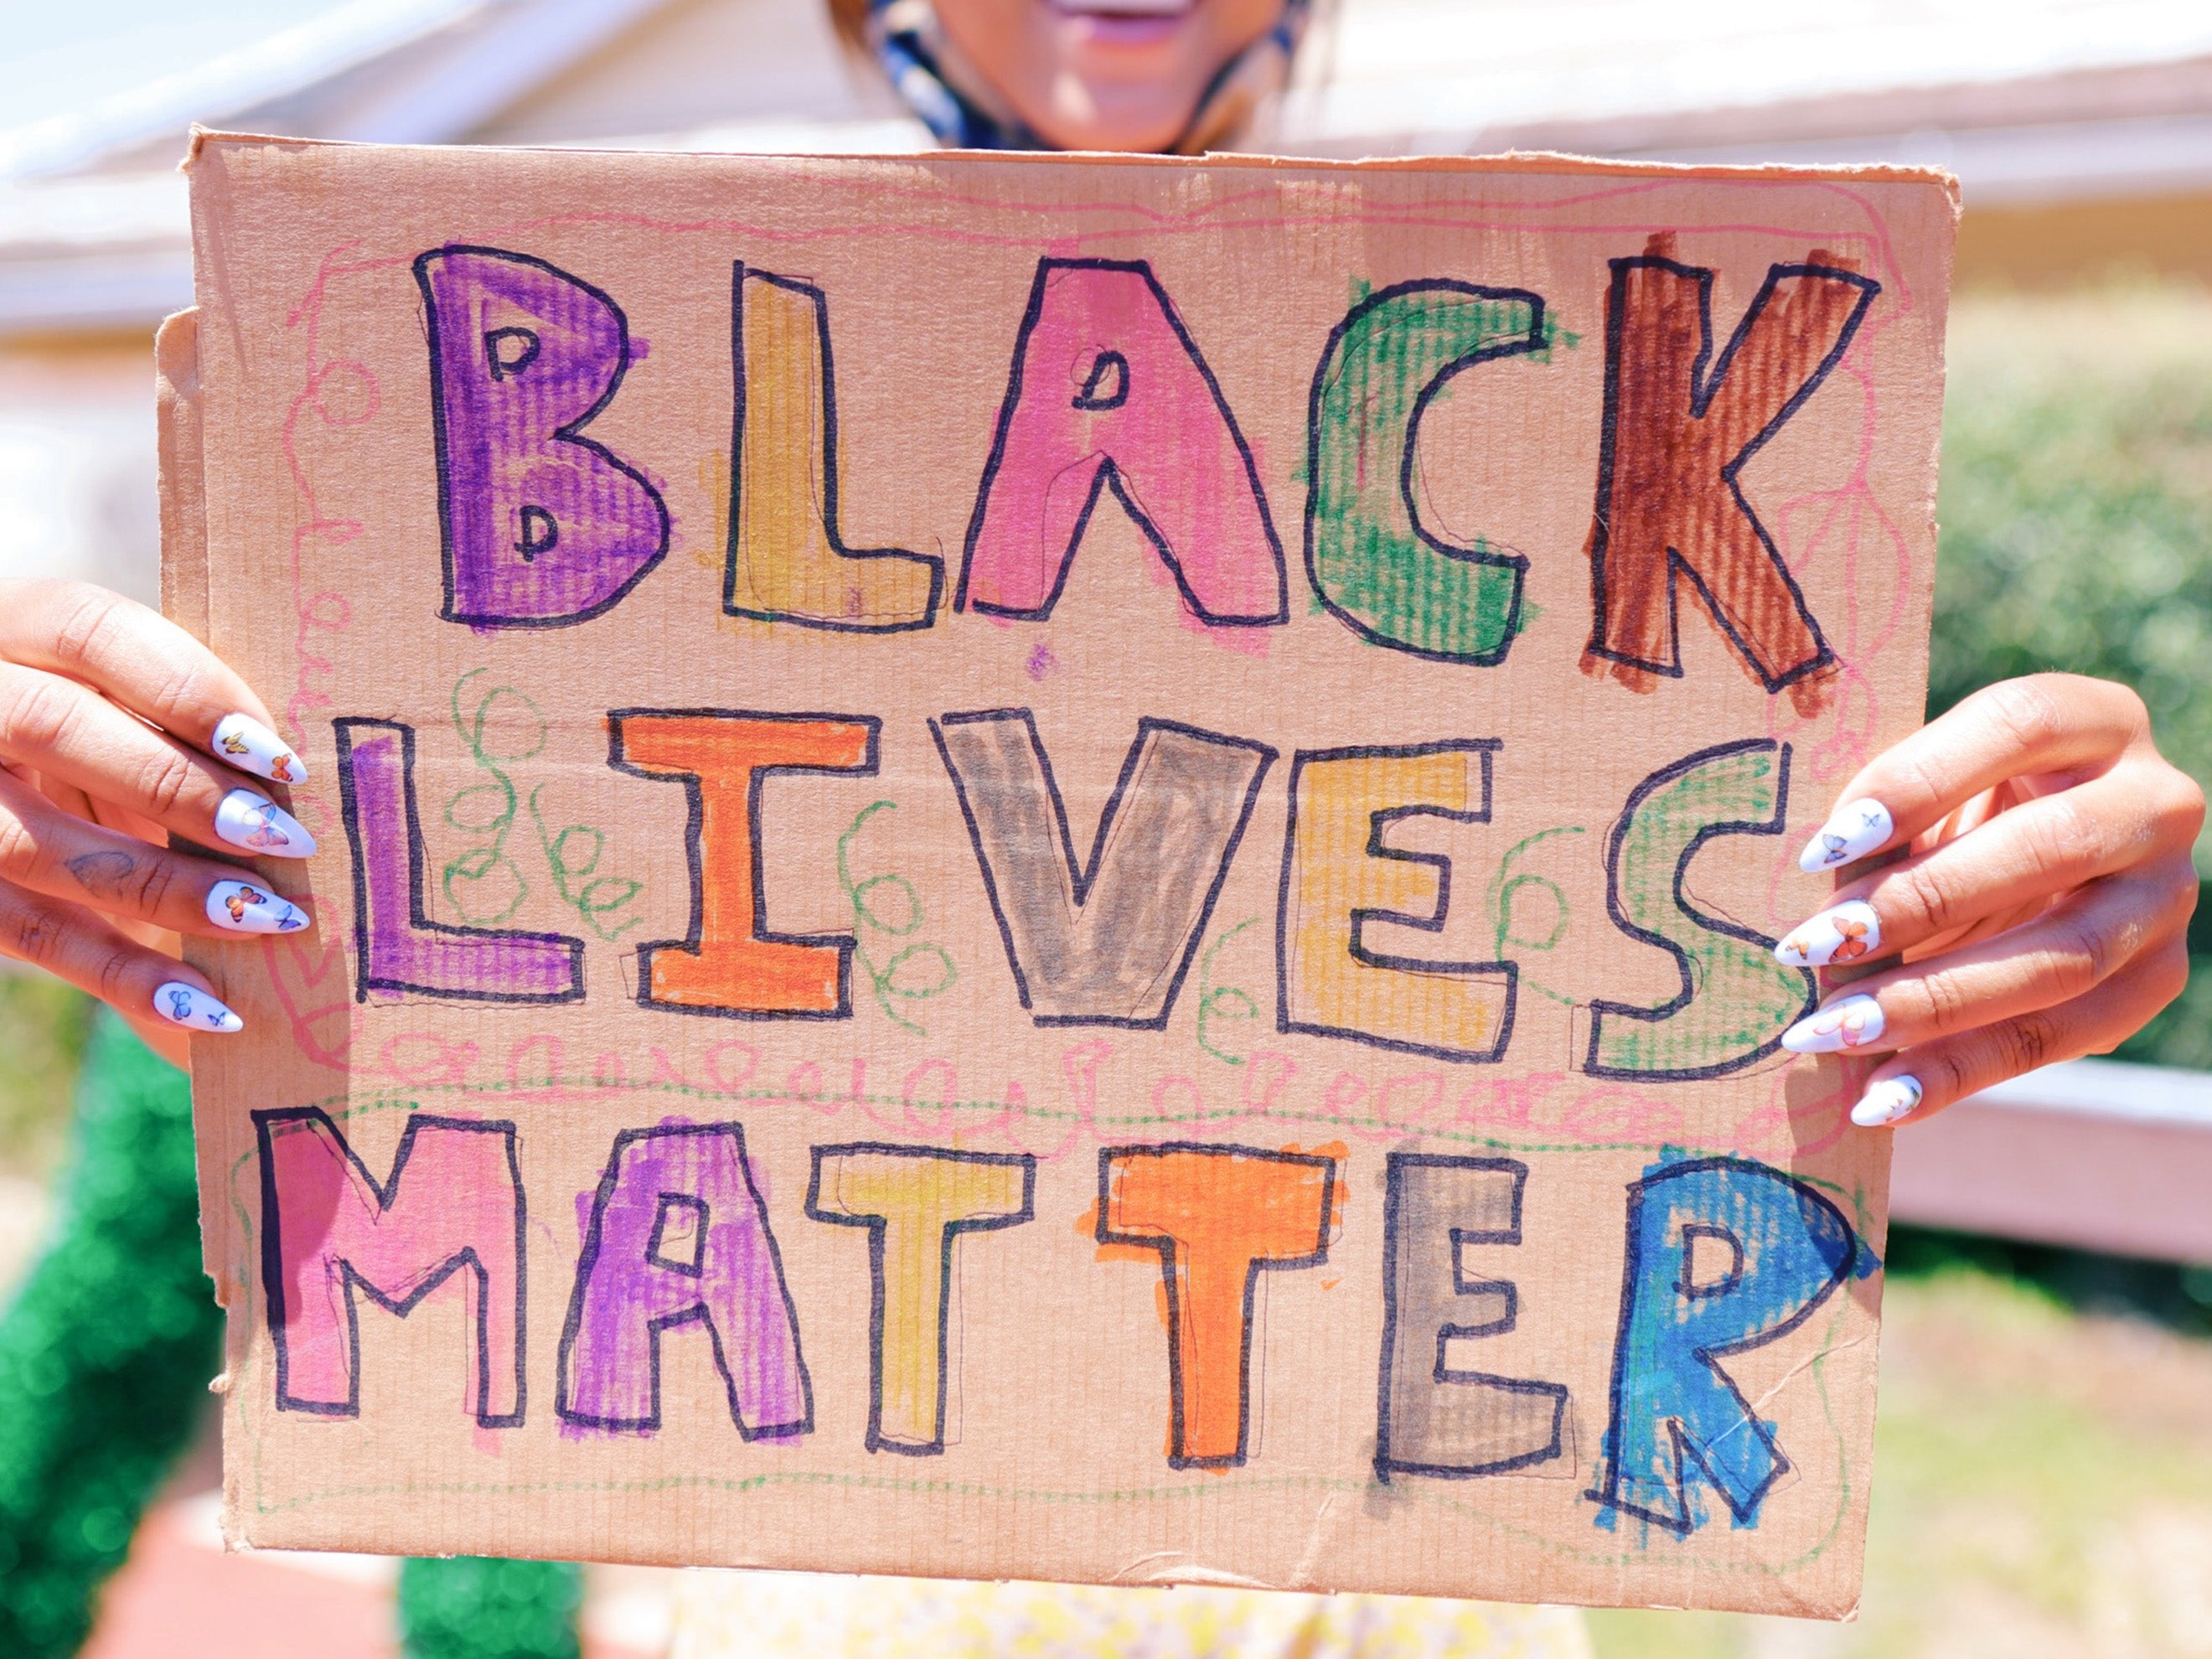 Sign that says Black Lives Matter in colorful letters